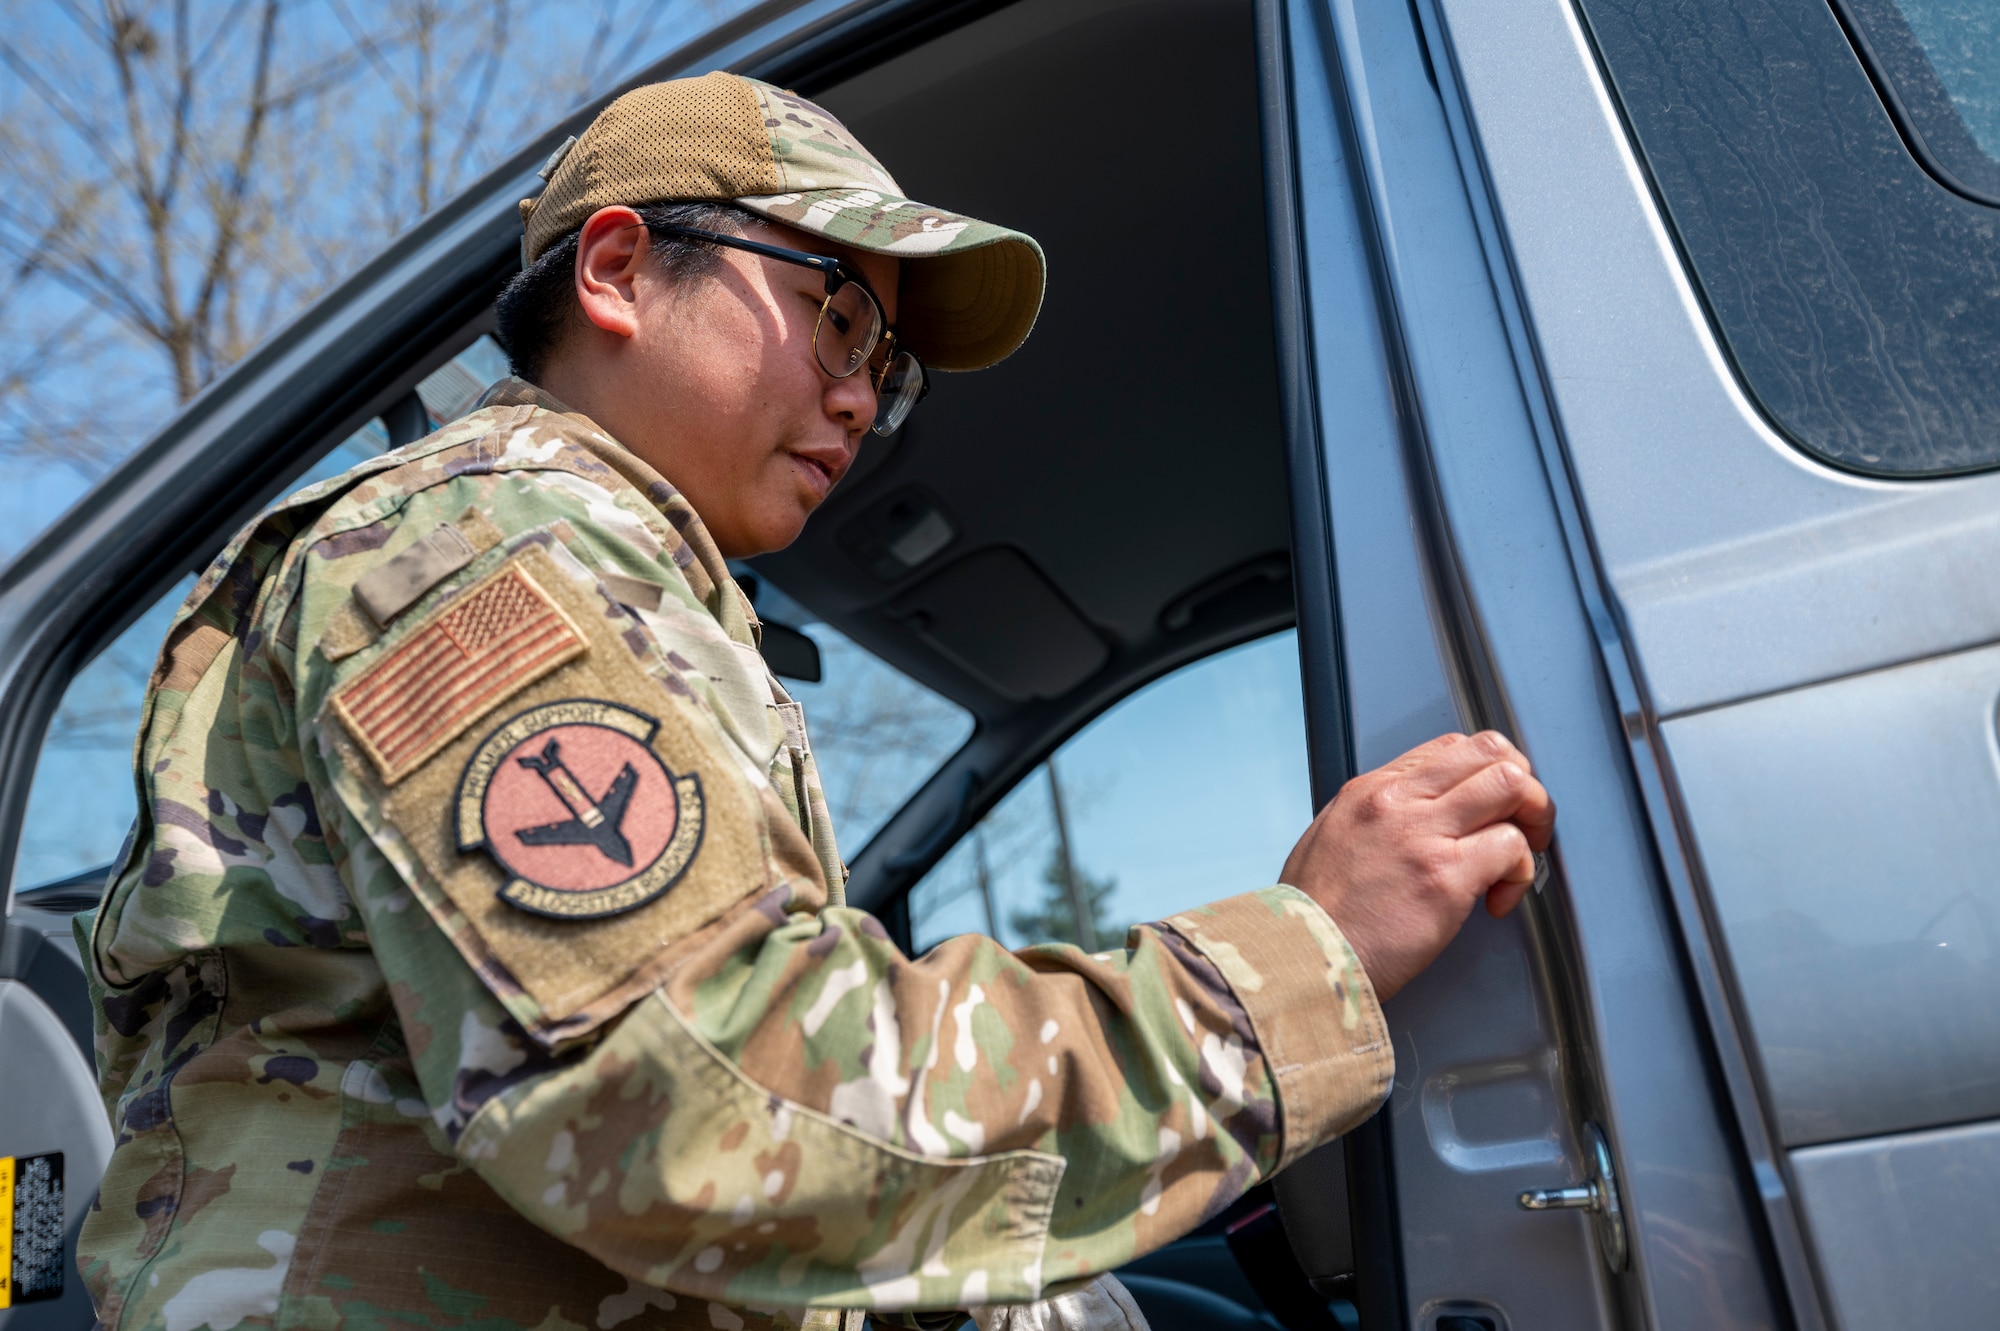 U.S. Air Force Tech. Sgt. Marilou Leybel, 51st Logistics Readiness Squadron fleet management and analysis, places the new refueling QR code at Osan Air Base, Republic of Korea, April 1, 2024. At the end of this initiative, Airmen of the 51st LRS will have serviced 840 vehicles, making the refueling process easier and more efficient for Airmen at Osan. (U.S. Air Force photo by Senior Airman Kaitlin Frazier)